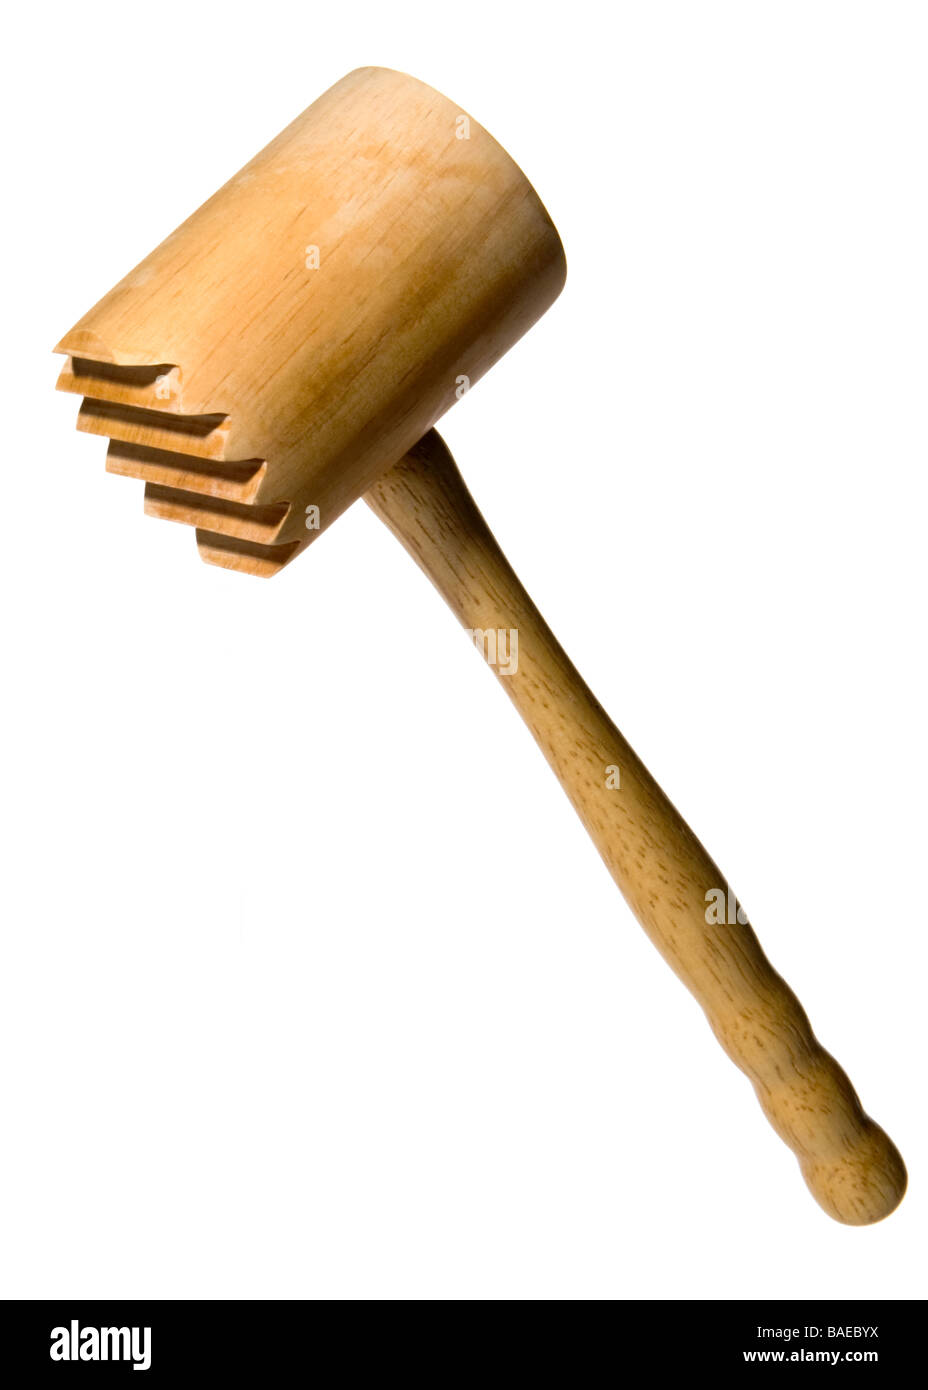 Wooden meat tenderiser mallet isolated on white, mallet head facing left vertical composition Stock Photo